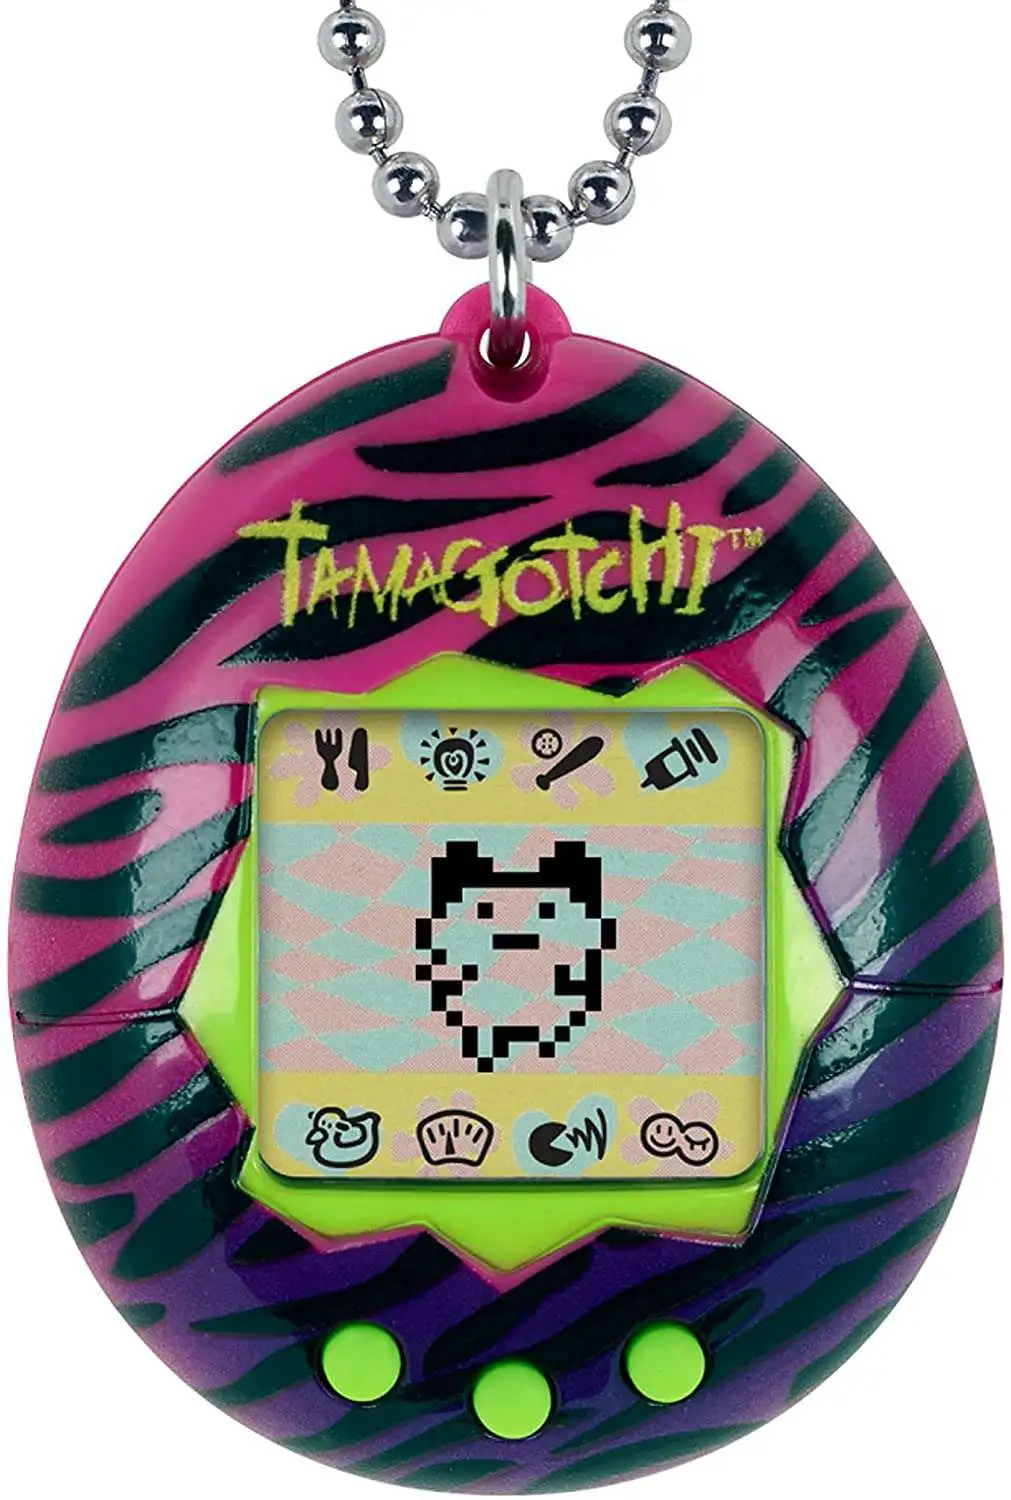 Tamagotchi Pet 20th Anniversary Pink Series 3 Ages 8 for sale online 